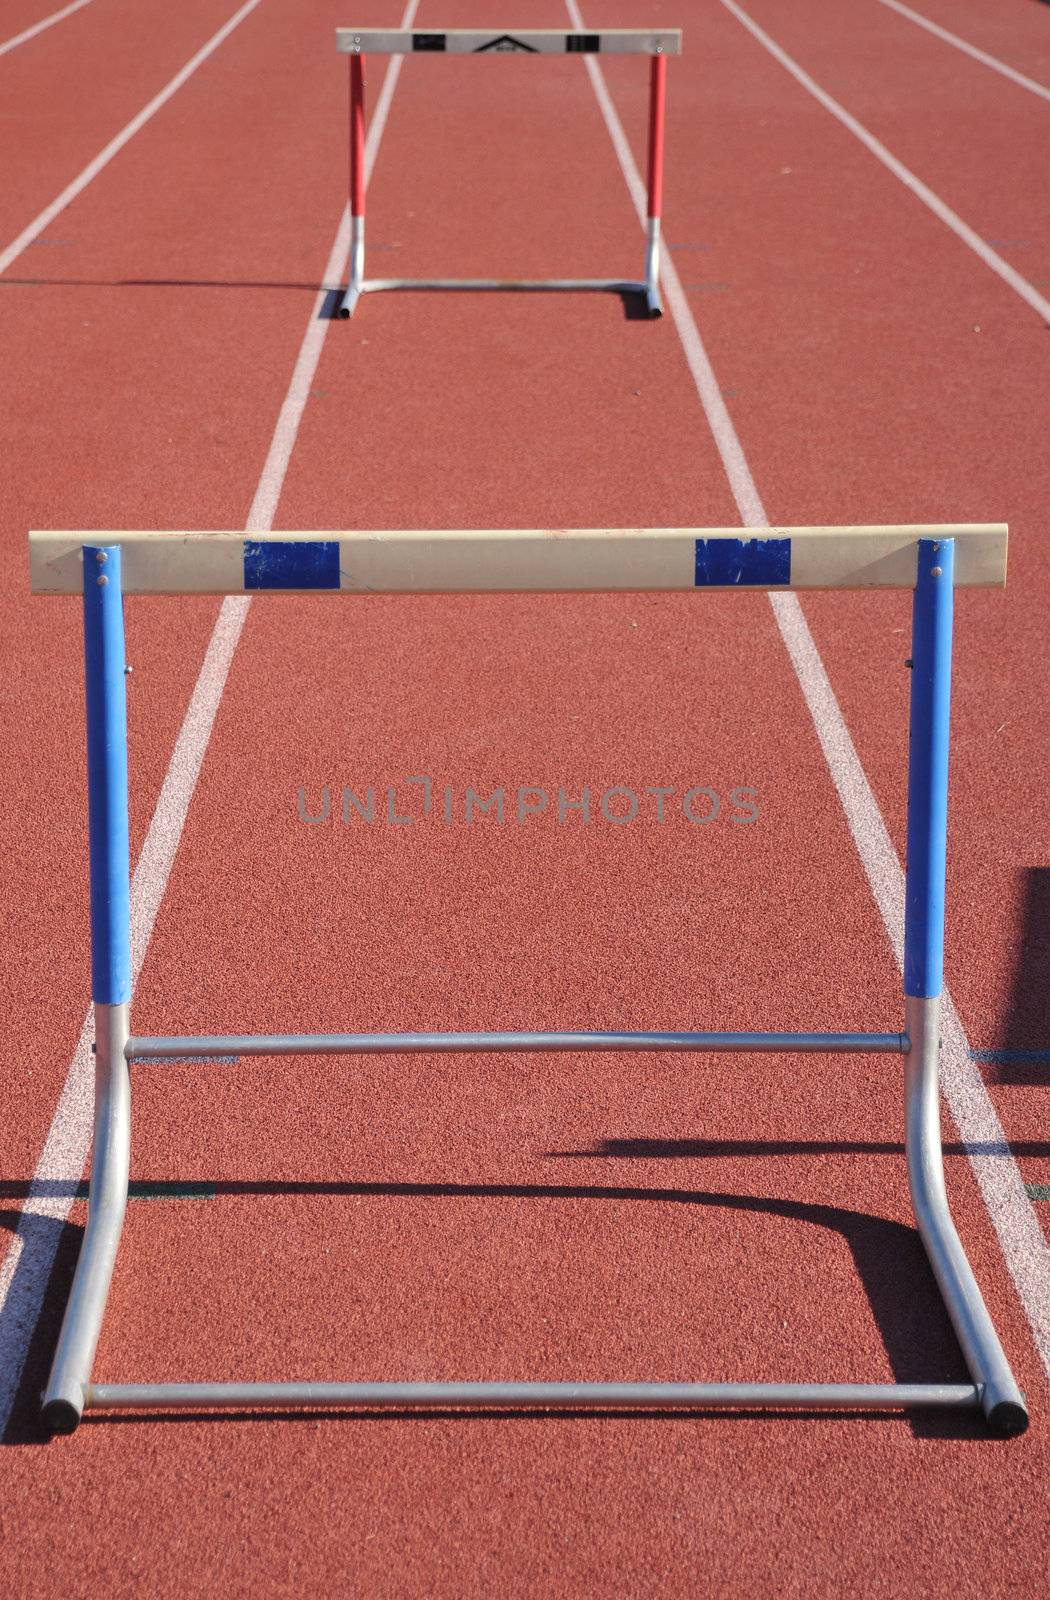 the basic hurdle in a lane or the concept of life and hurdles